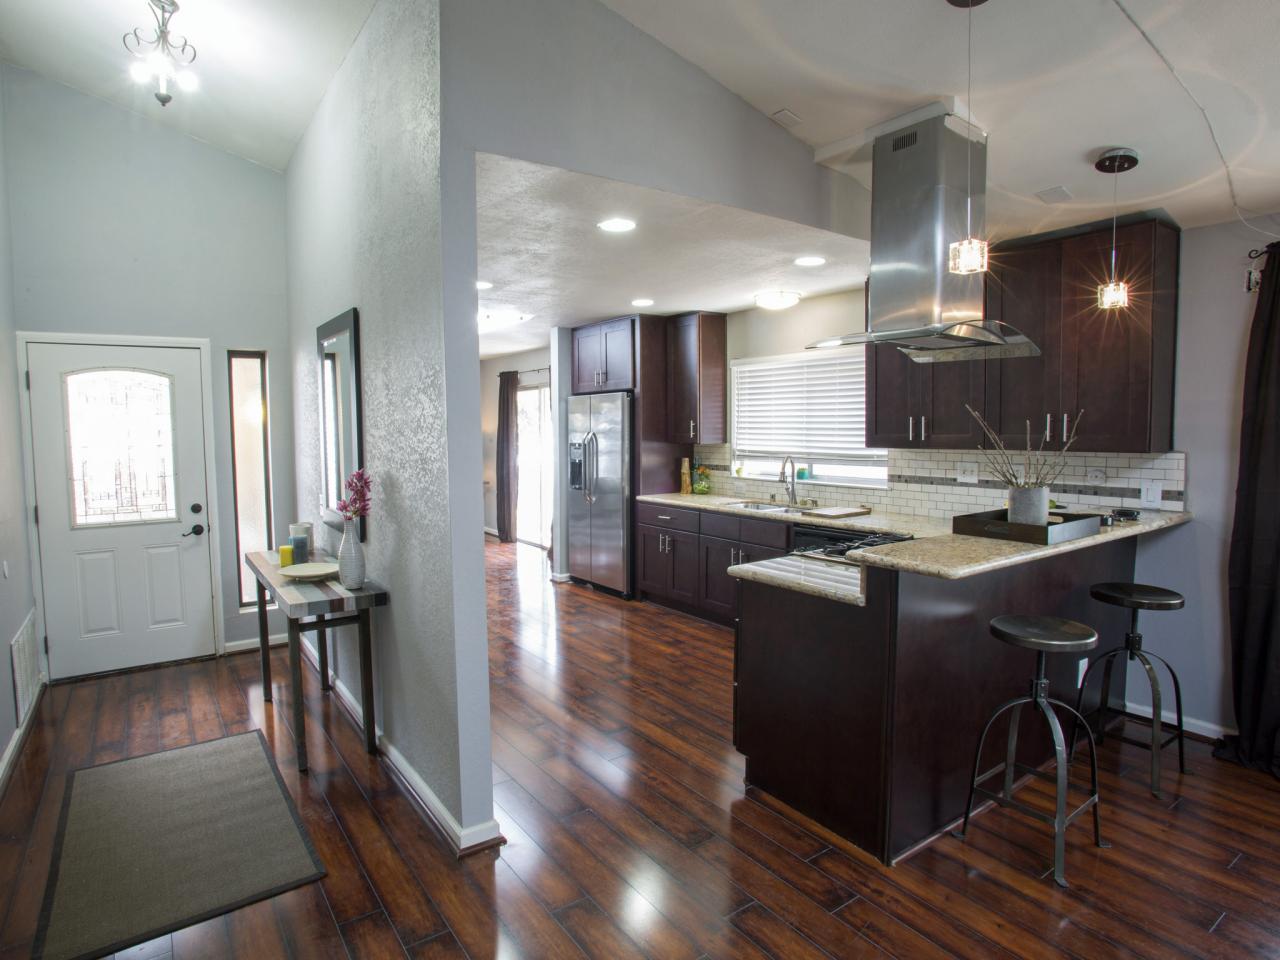 The Pros And Cons Of Laminate Flooring, Dark Hardwood Floors Pros And Cons